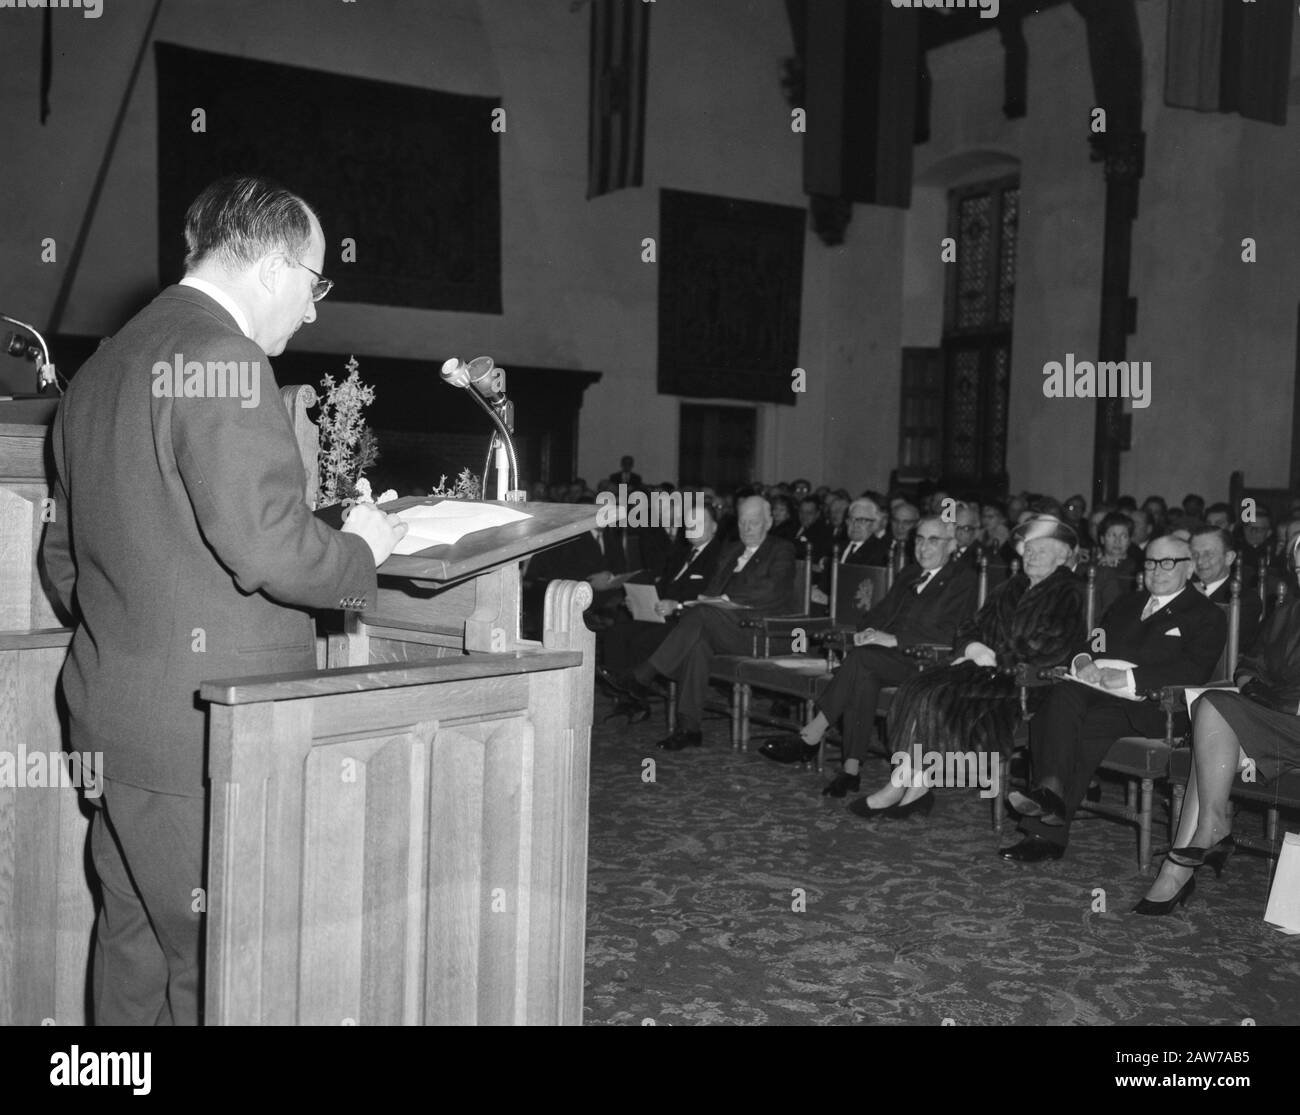 Minister Mr. J. M. L. T. Cals opens International Press Center The Nieuwspoort. The Knights Quay Kortenhorst Mrs Cals and Minister Cals Date: March 5, 1962 Location: The Hague, South Holland Keywords: openings Person Name: Cals, Jo Institution Name: Knights Stock Photo